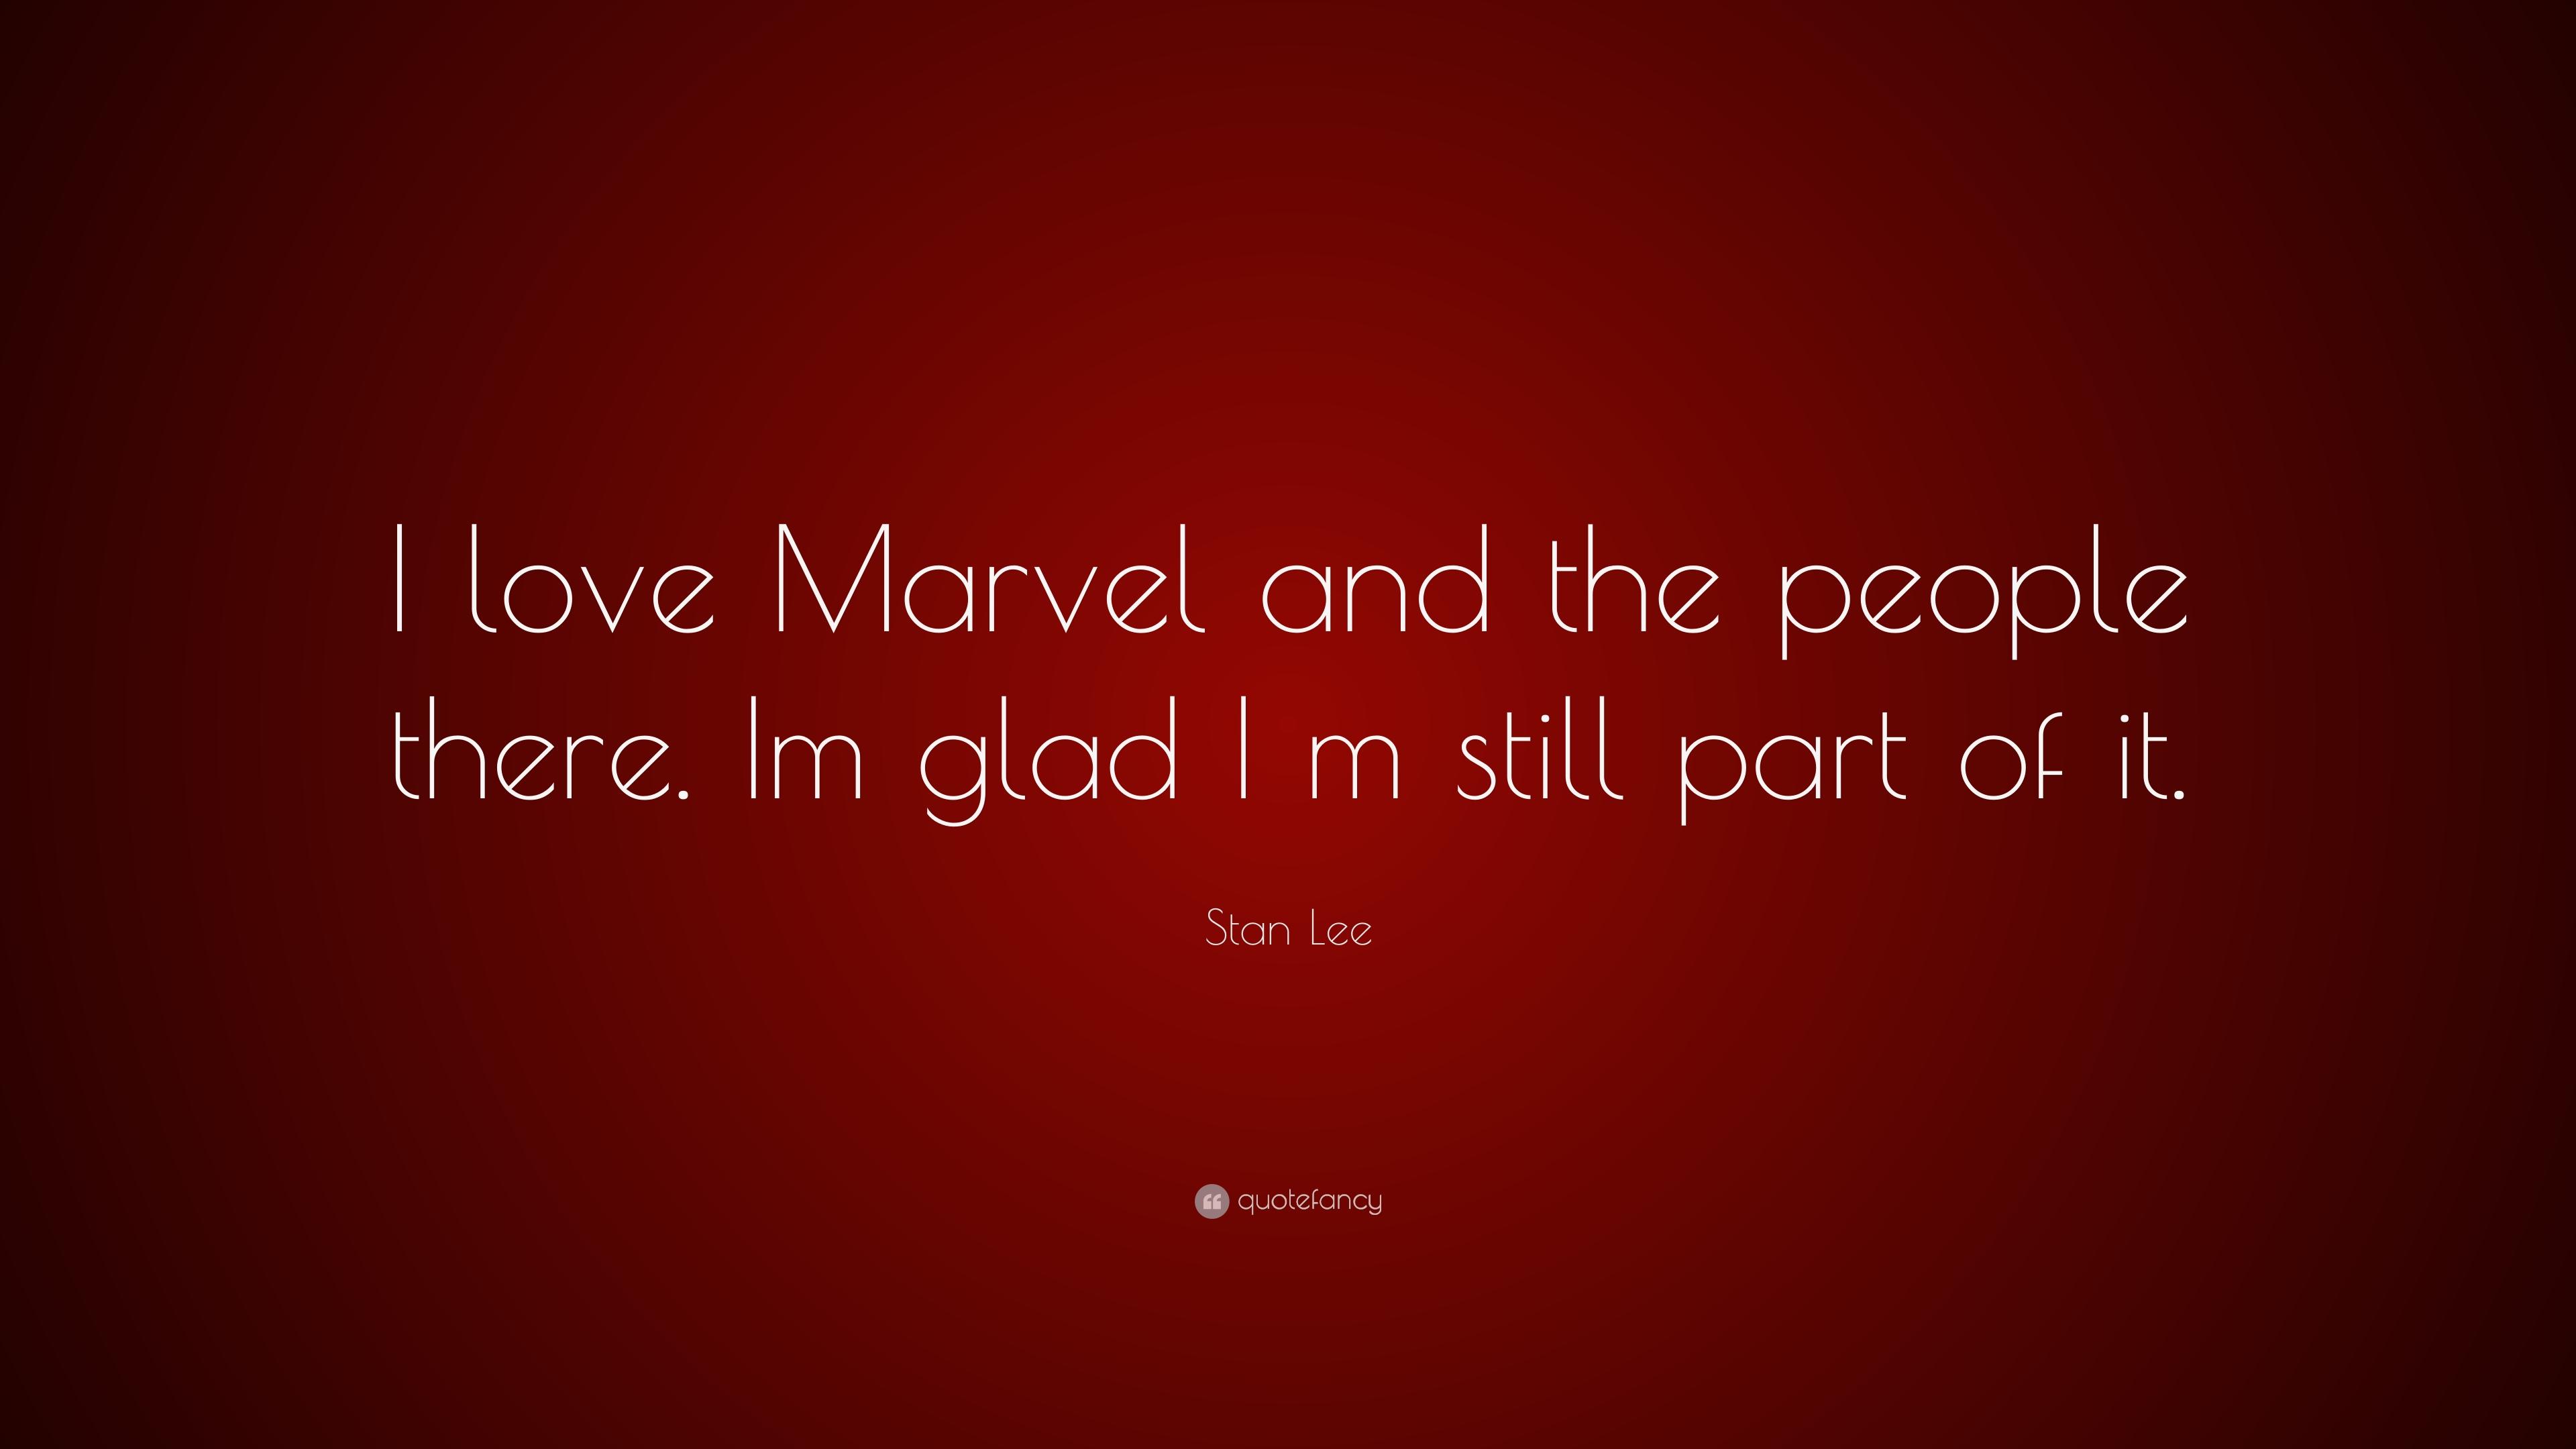 Stan Lee Quote: “I love Marvel and the people there. Im glad